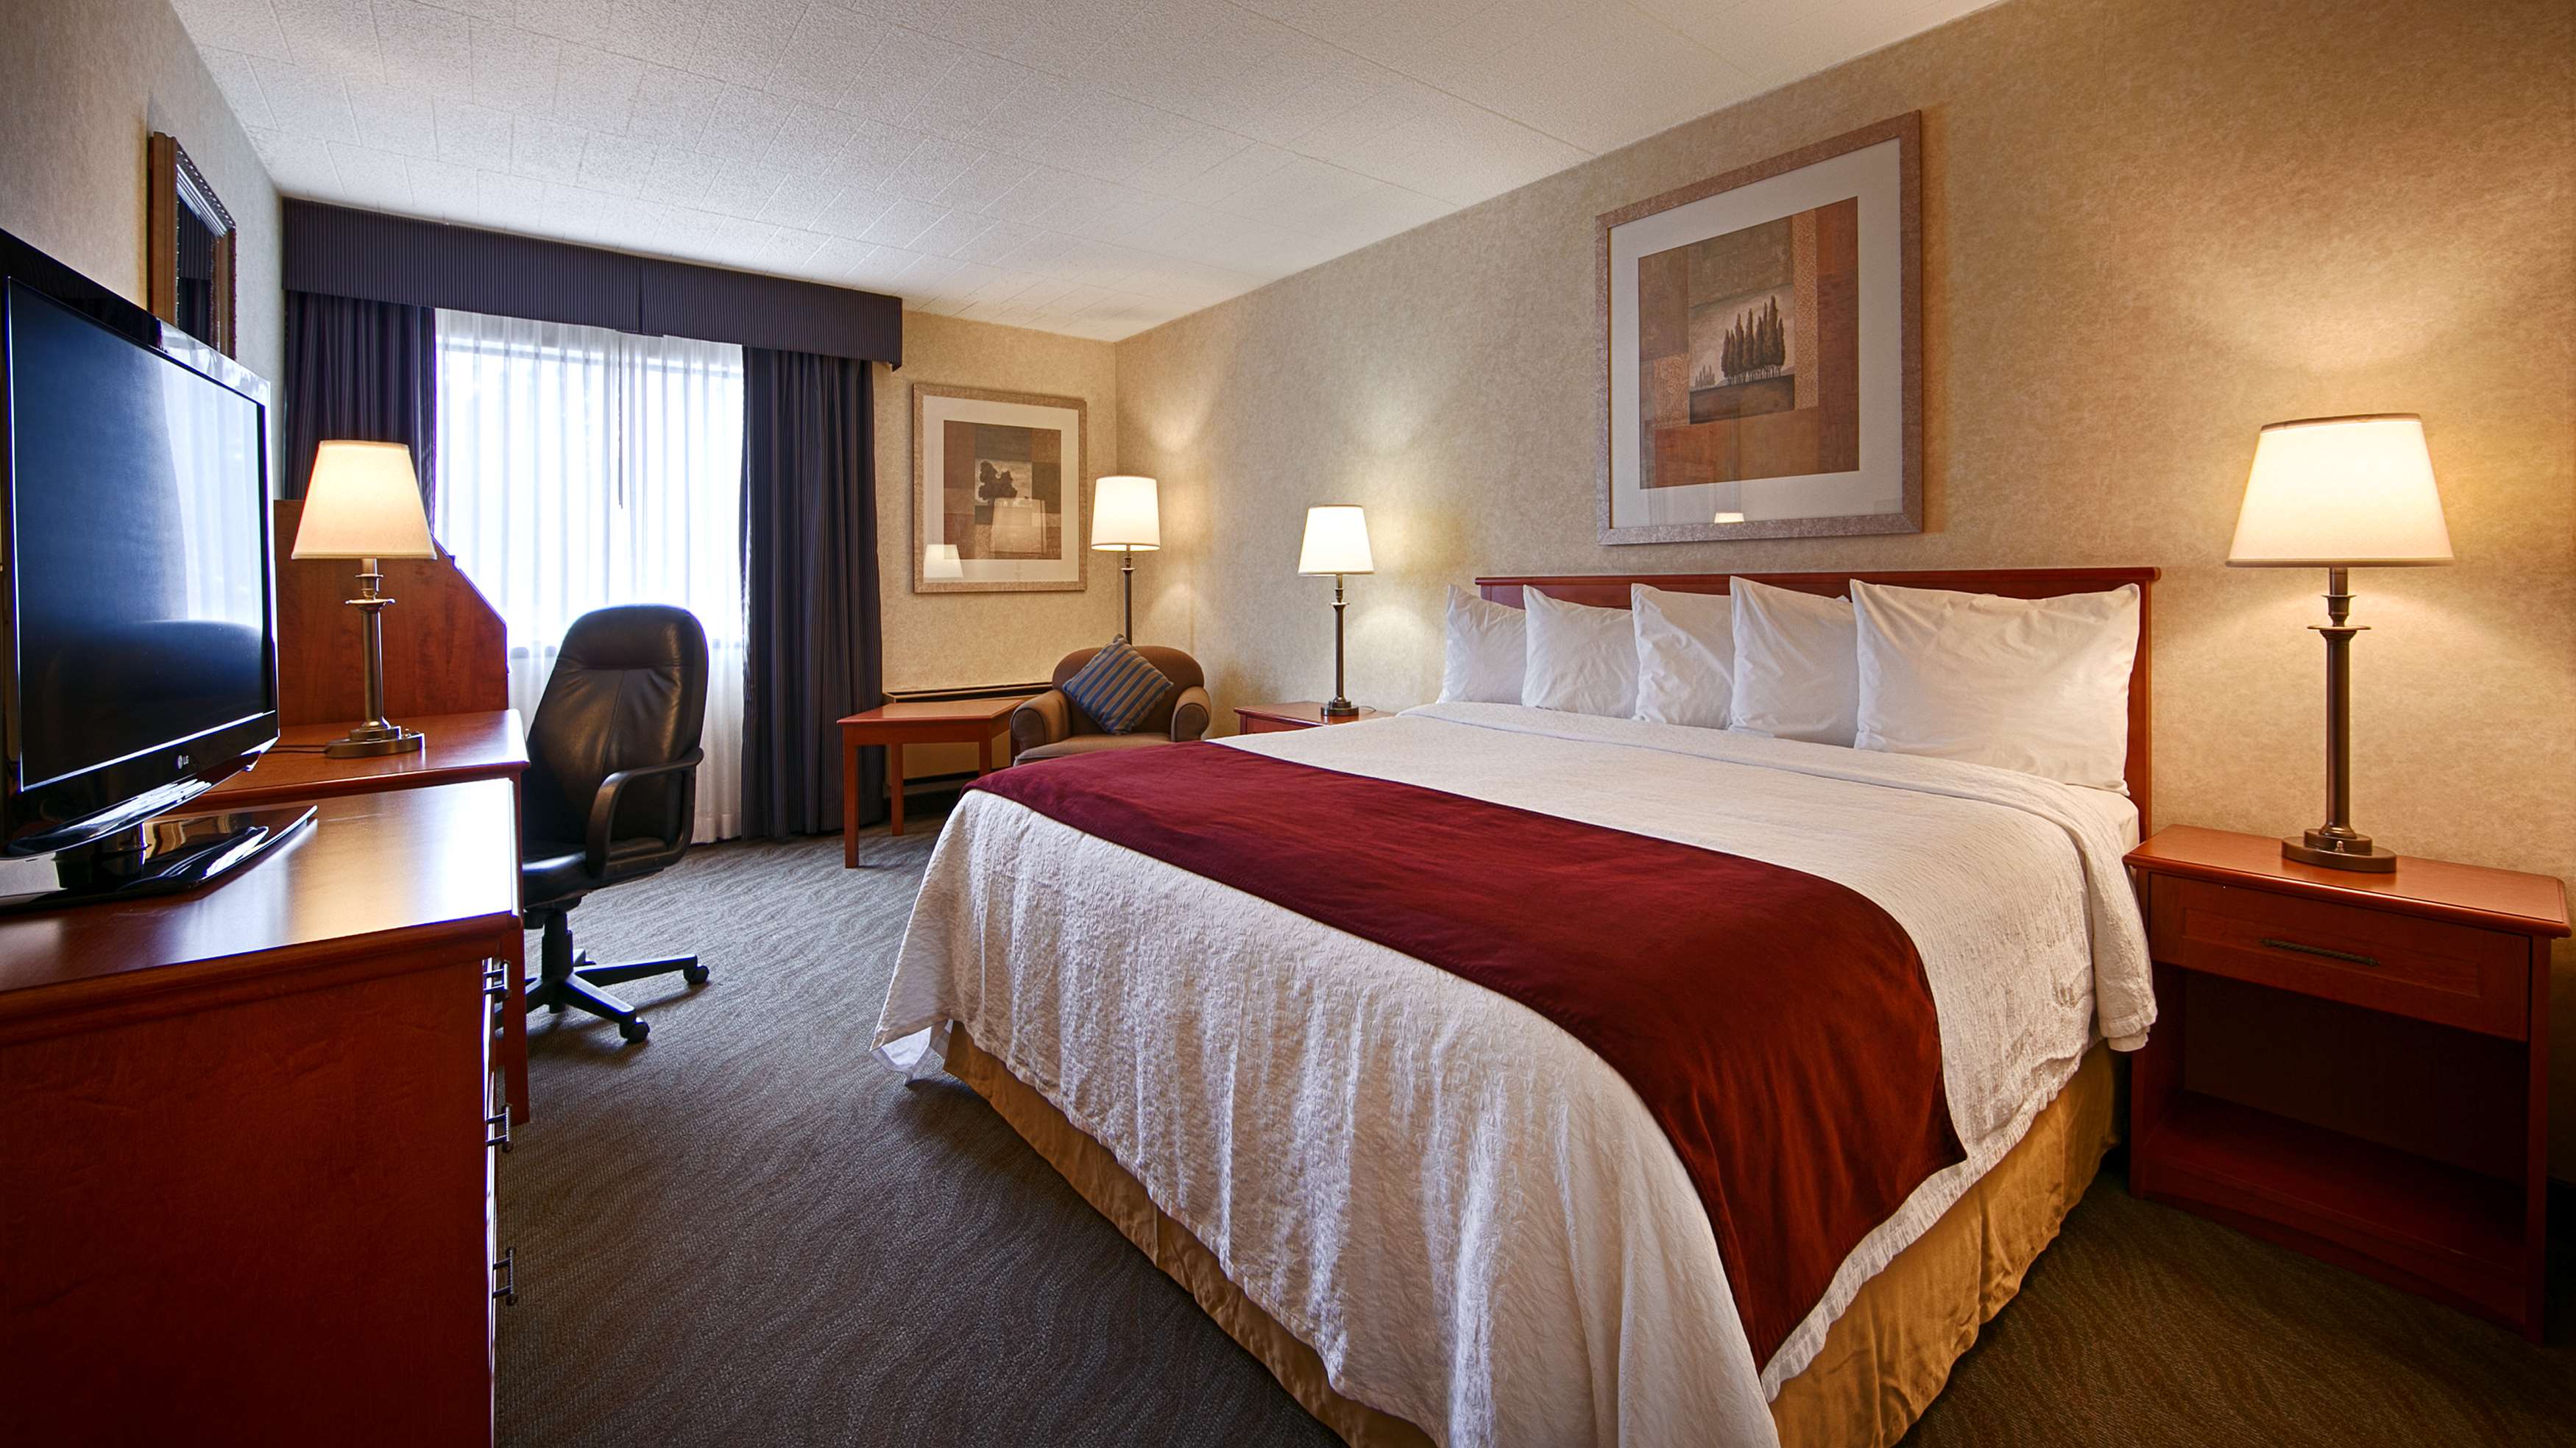 King Room Best Western North Bay Hotel & Conference Centre North Bay (705)474-5800